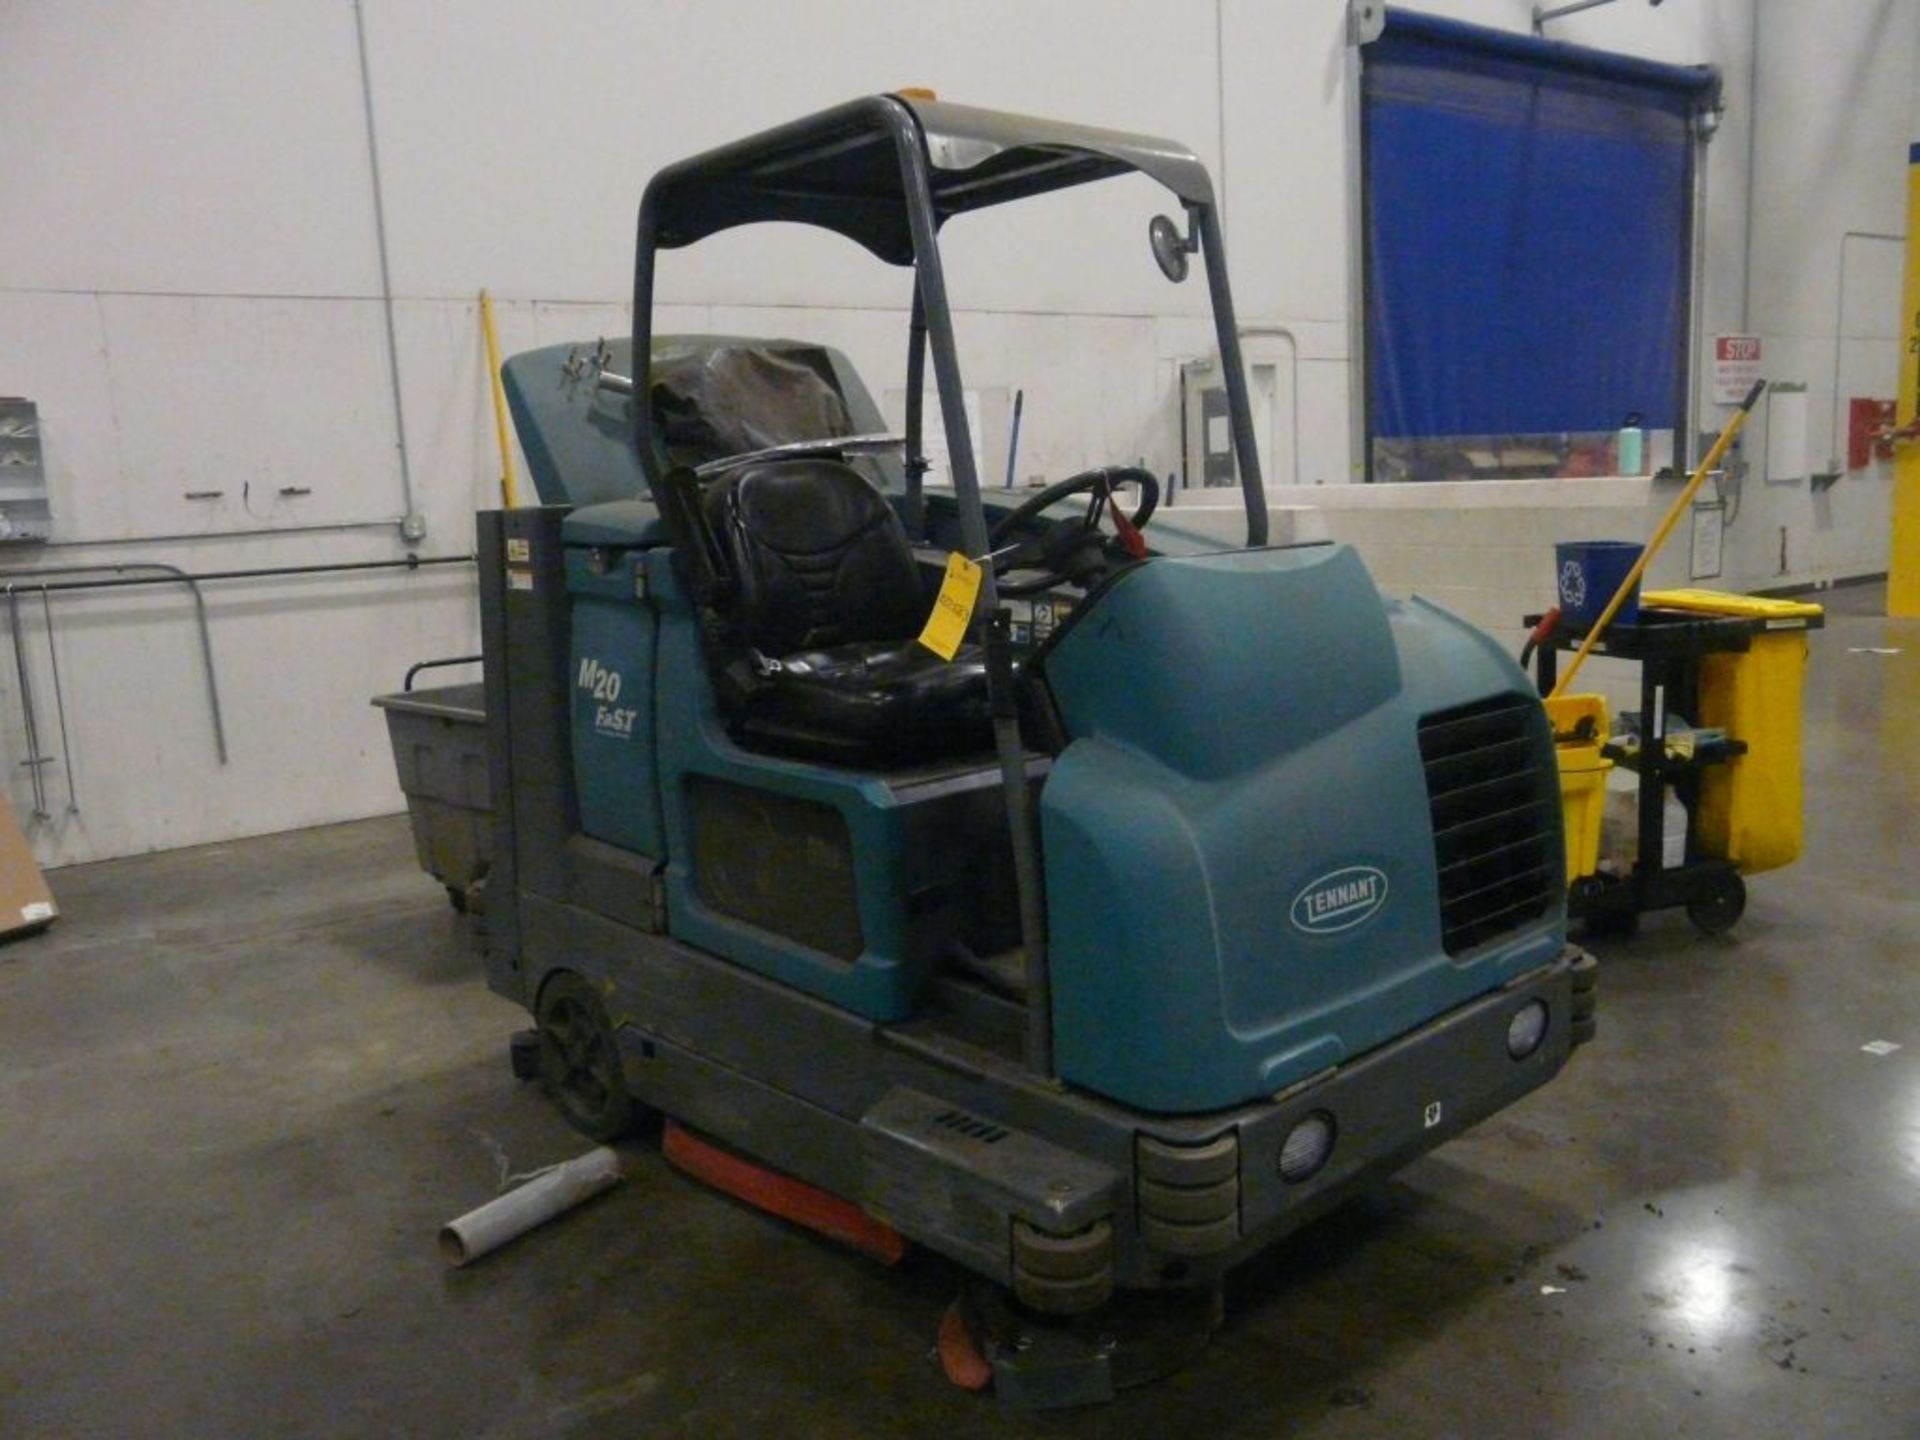 Tennant Floor Scrubber - Serial No. M20-1352; Type: F363966; 3875 Hours; GVW: 5200 lbs; M20 Fast;